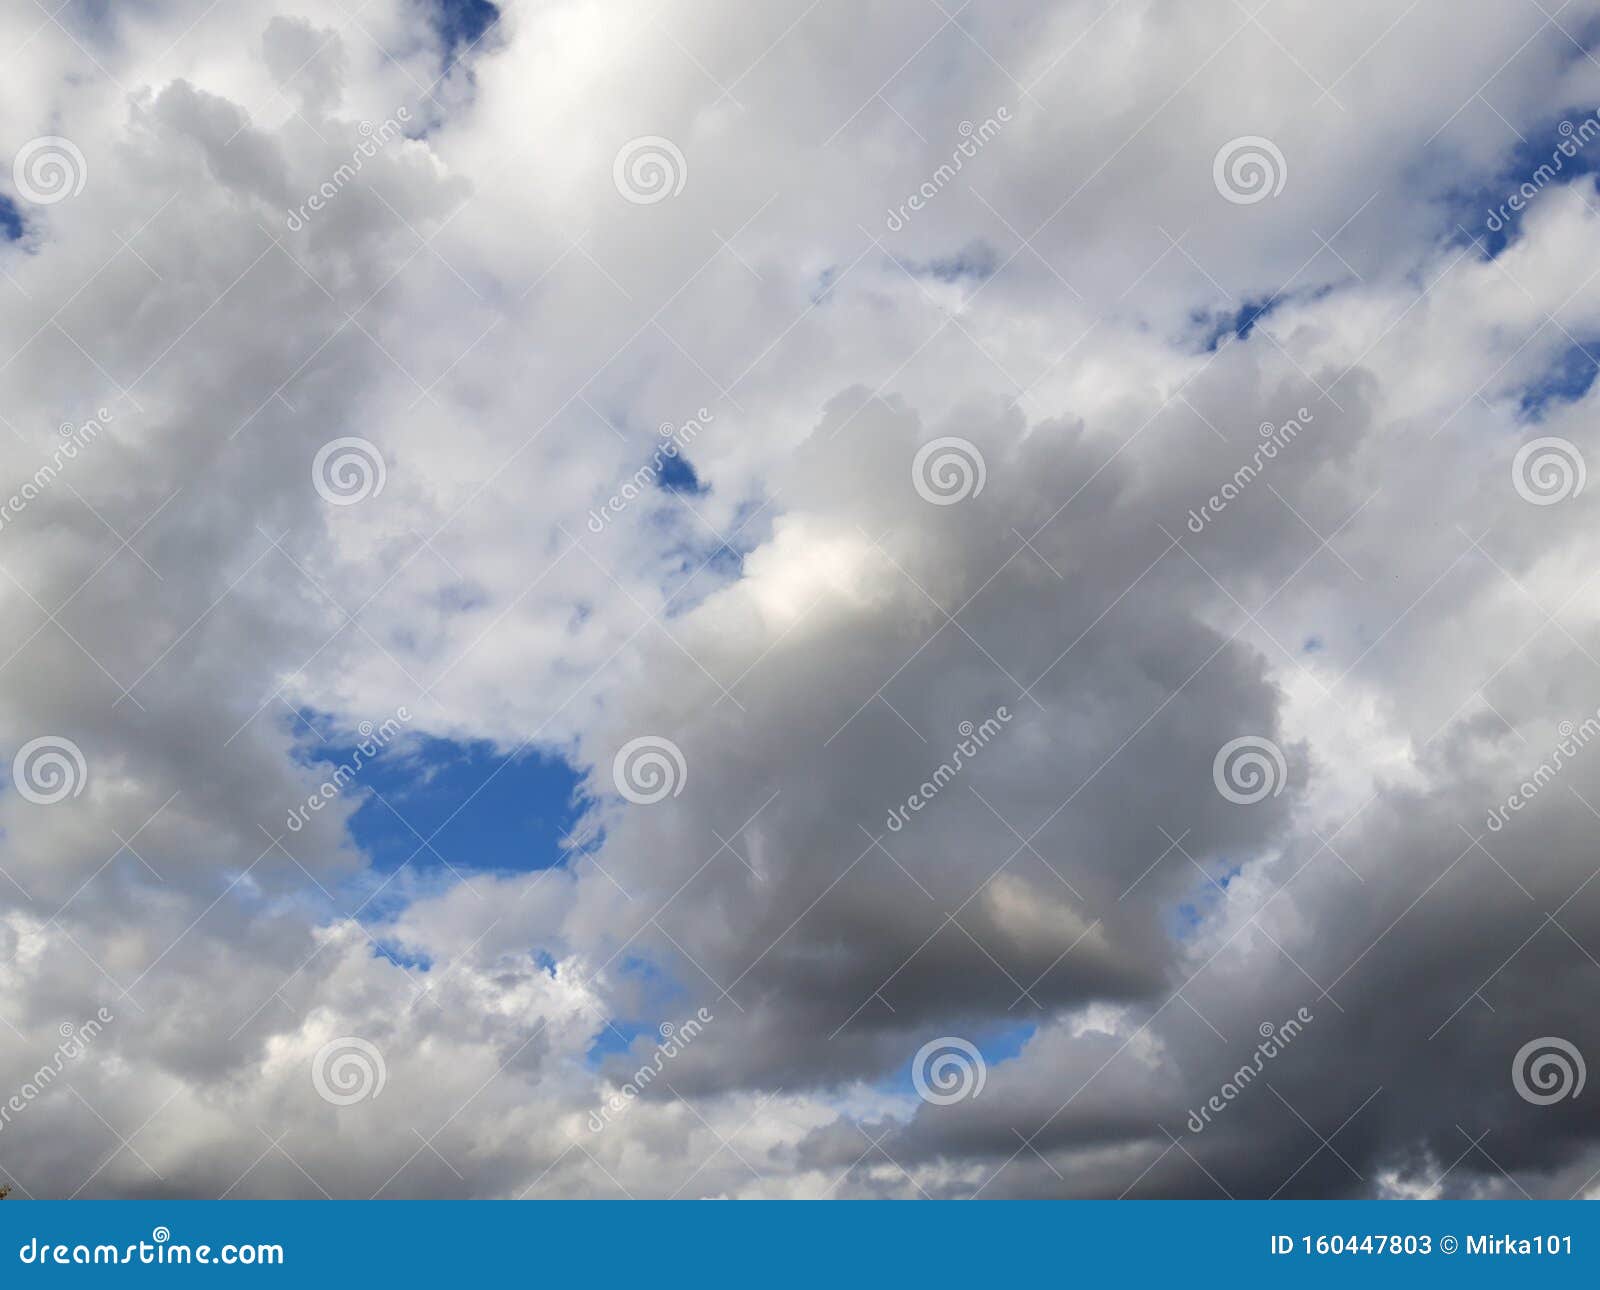 Dark Blue Sky With Clouds Wallpaper